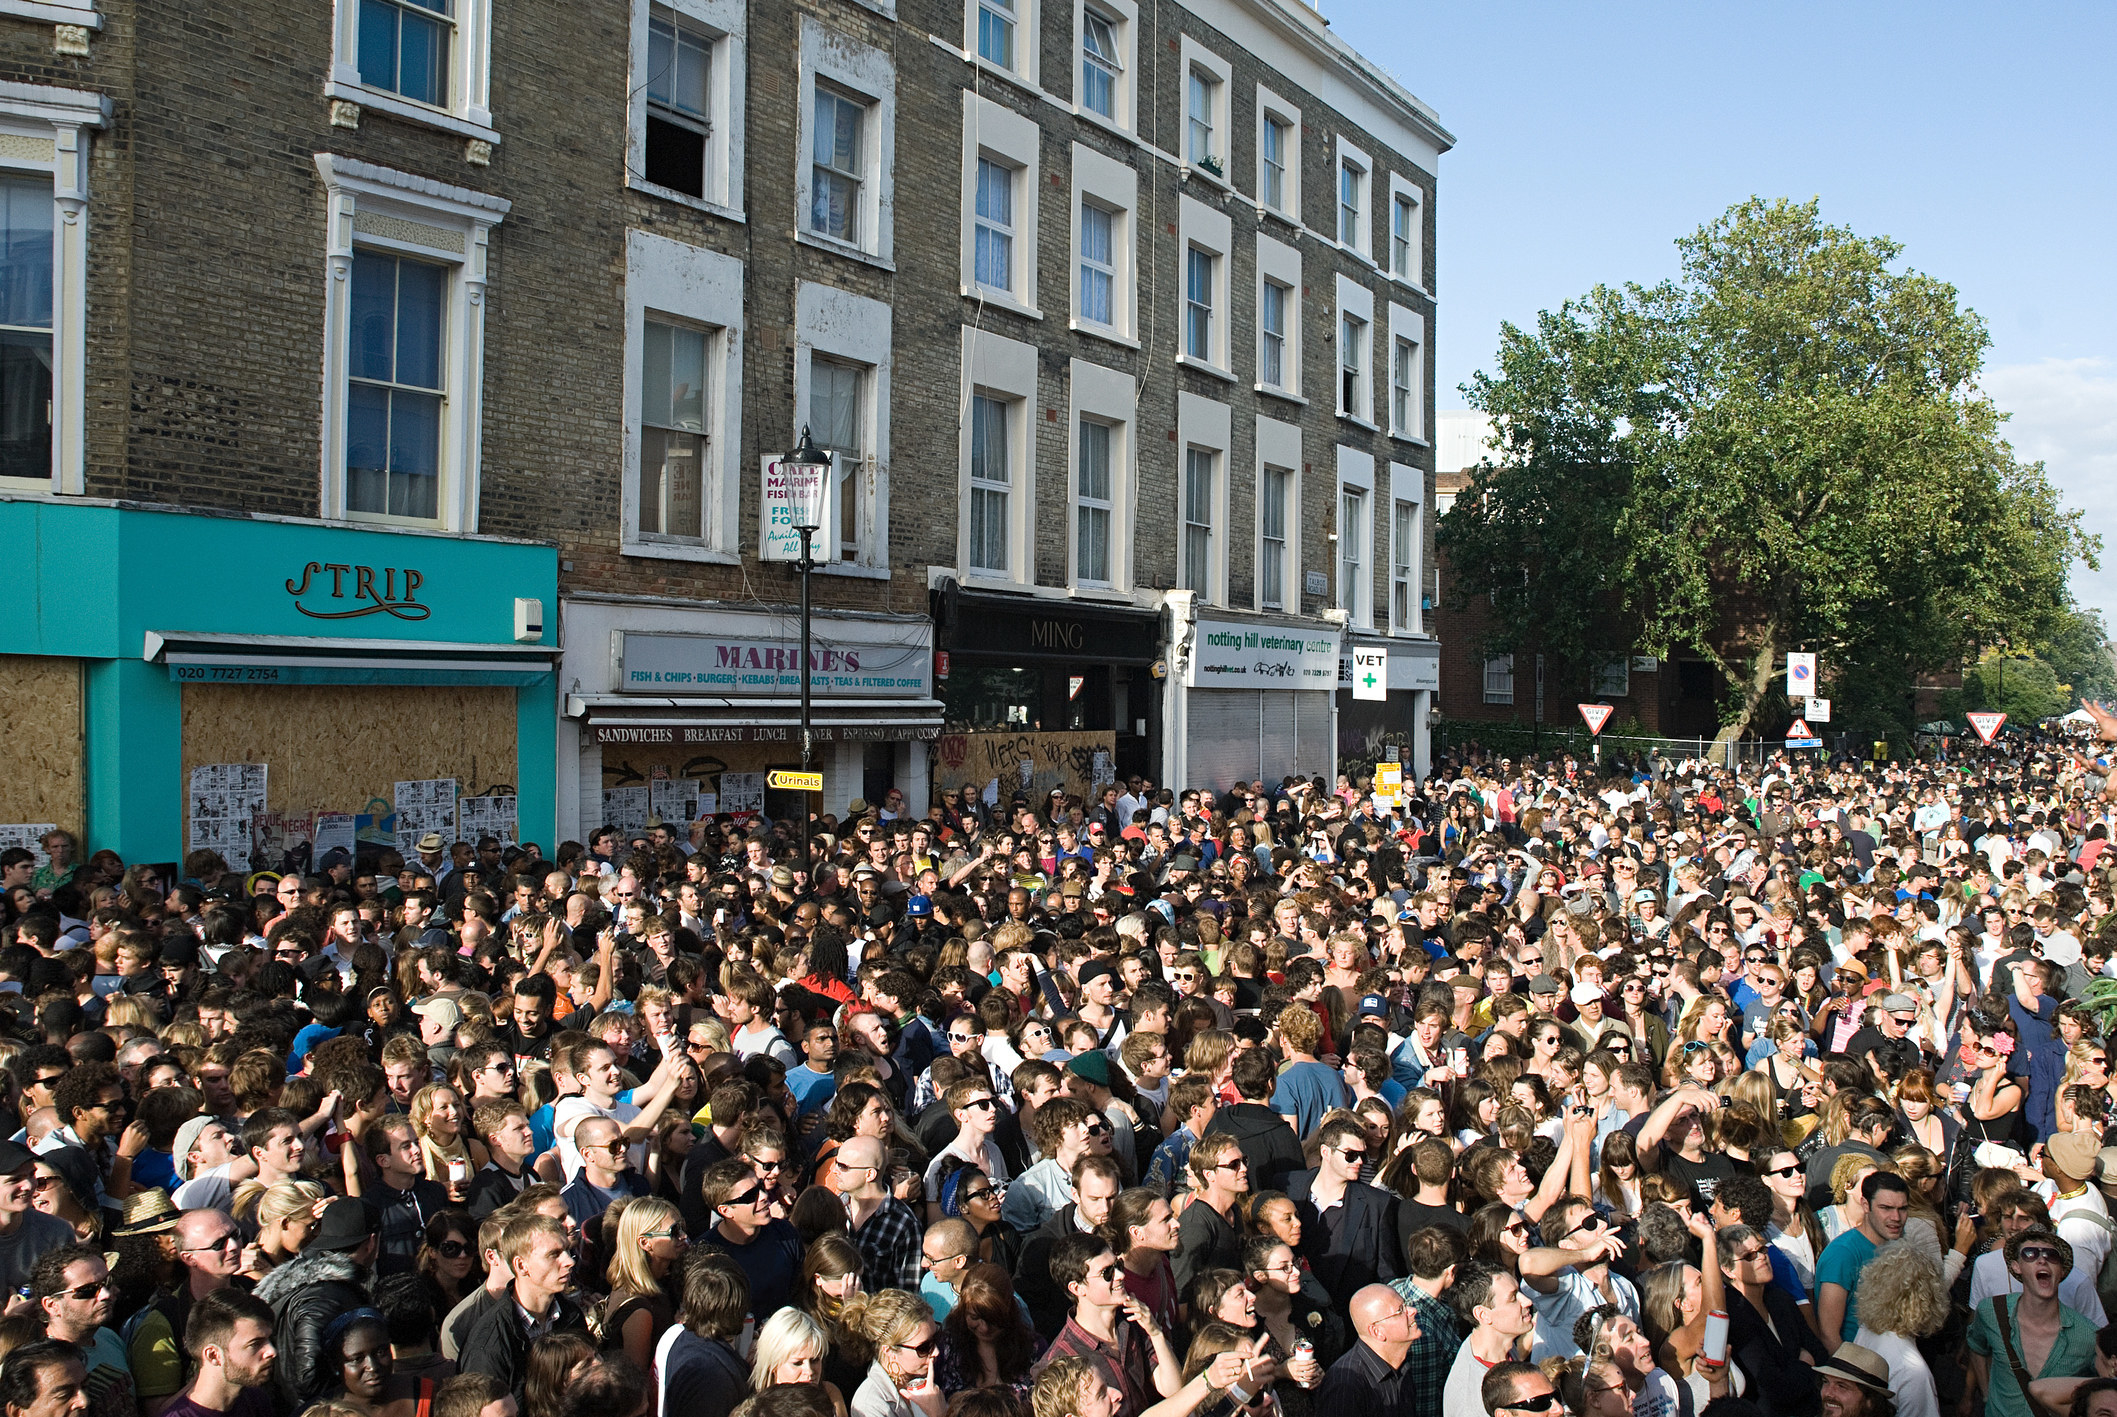 People at Notting hill Carnival